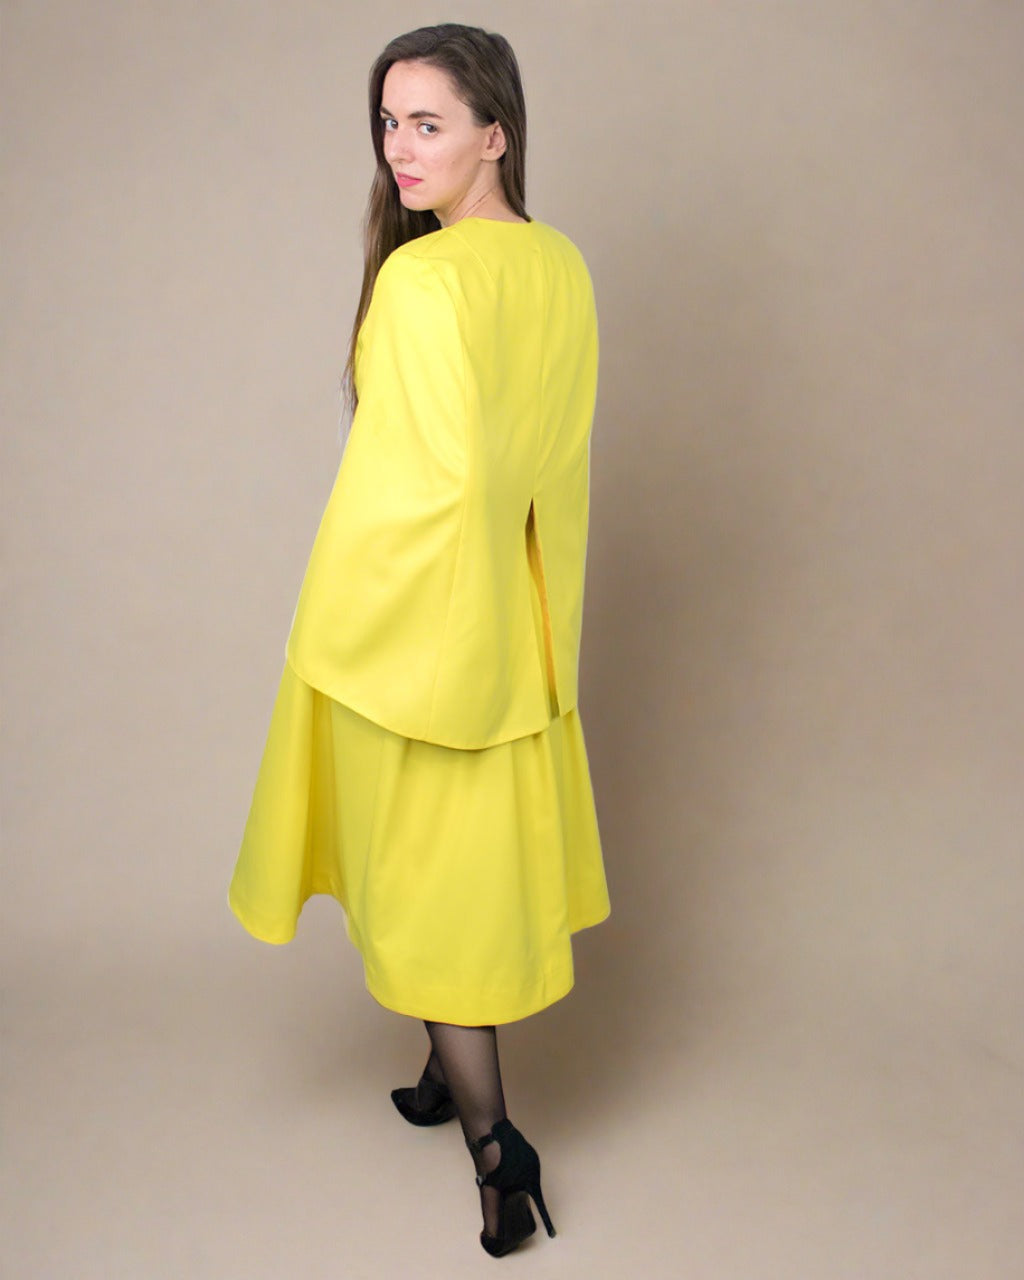 Back view of Amee Raincoat longline yellow mustard waterproof gabardine cape spring trench coat by ADKN